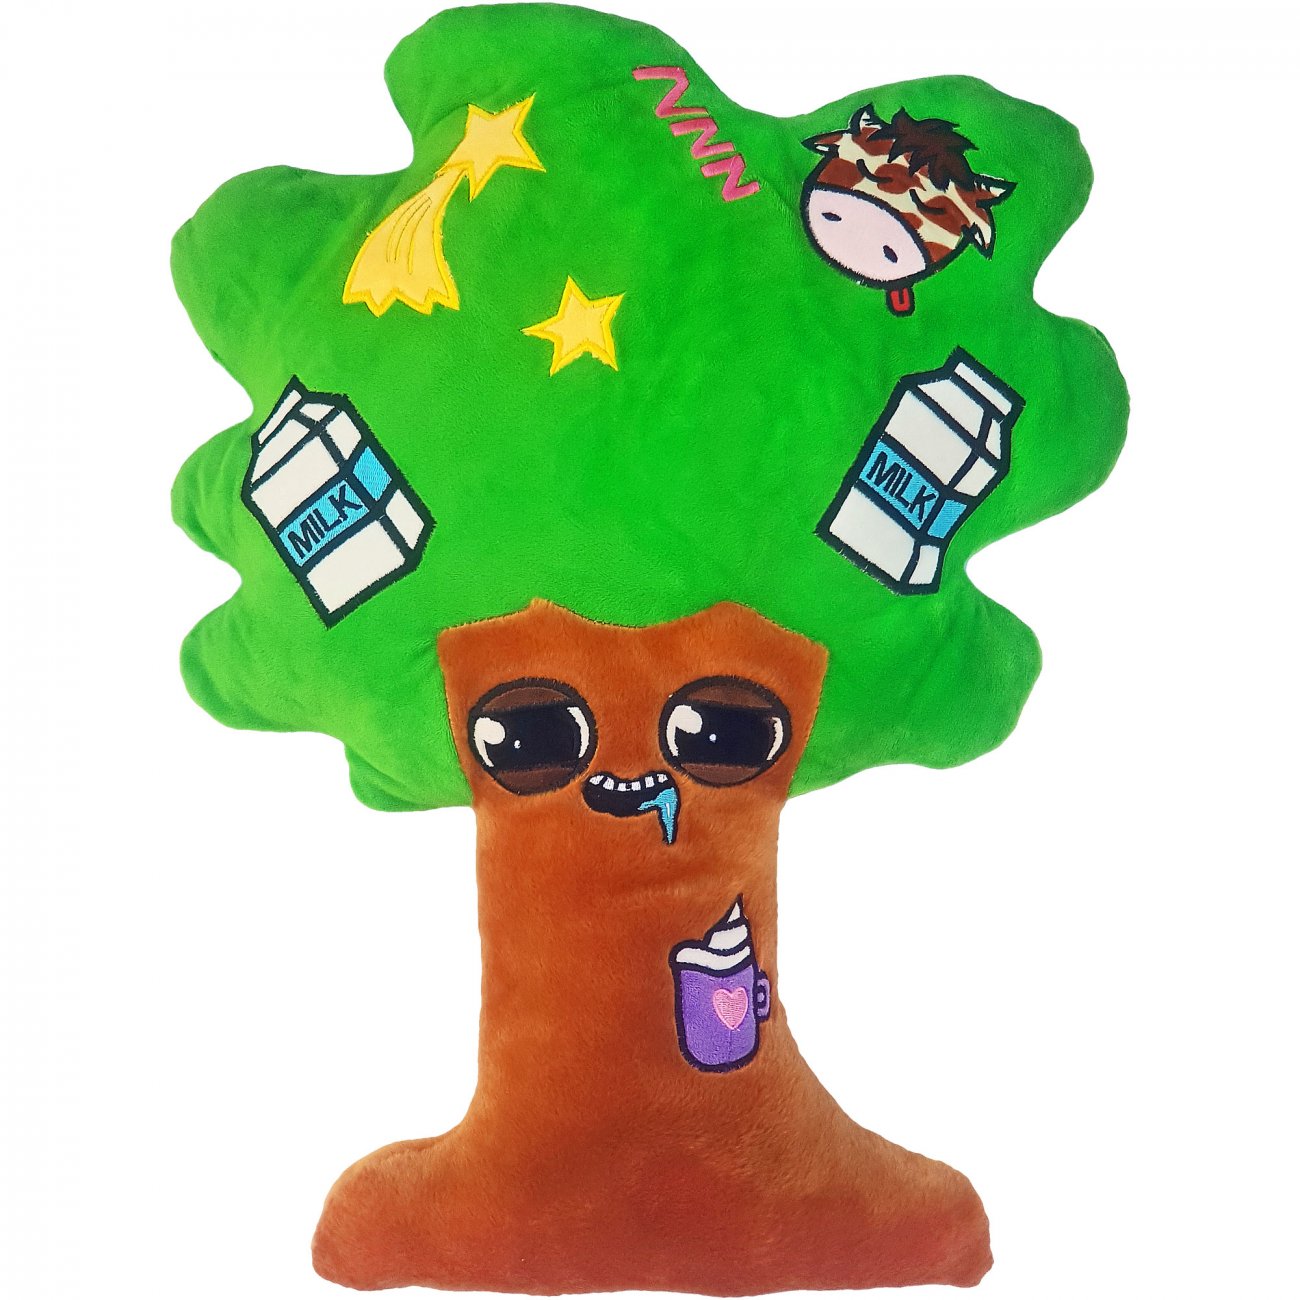 Milktree Limited Edition Pillow Shop Smiley Cushion Emoticon Tree